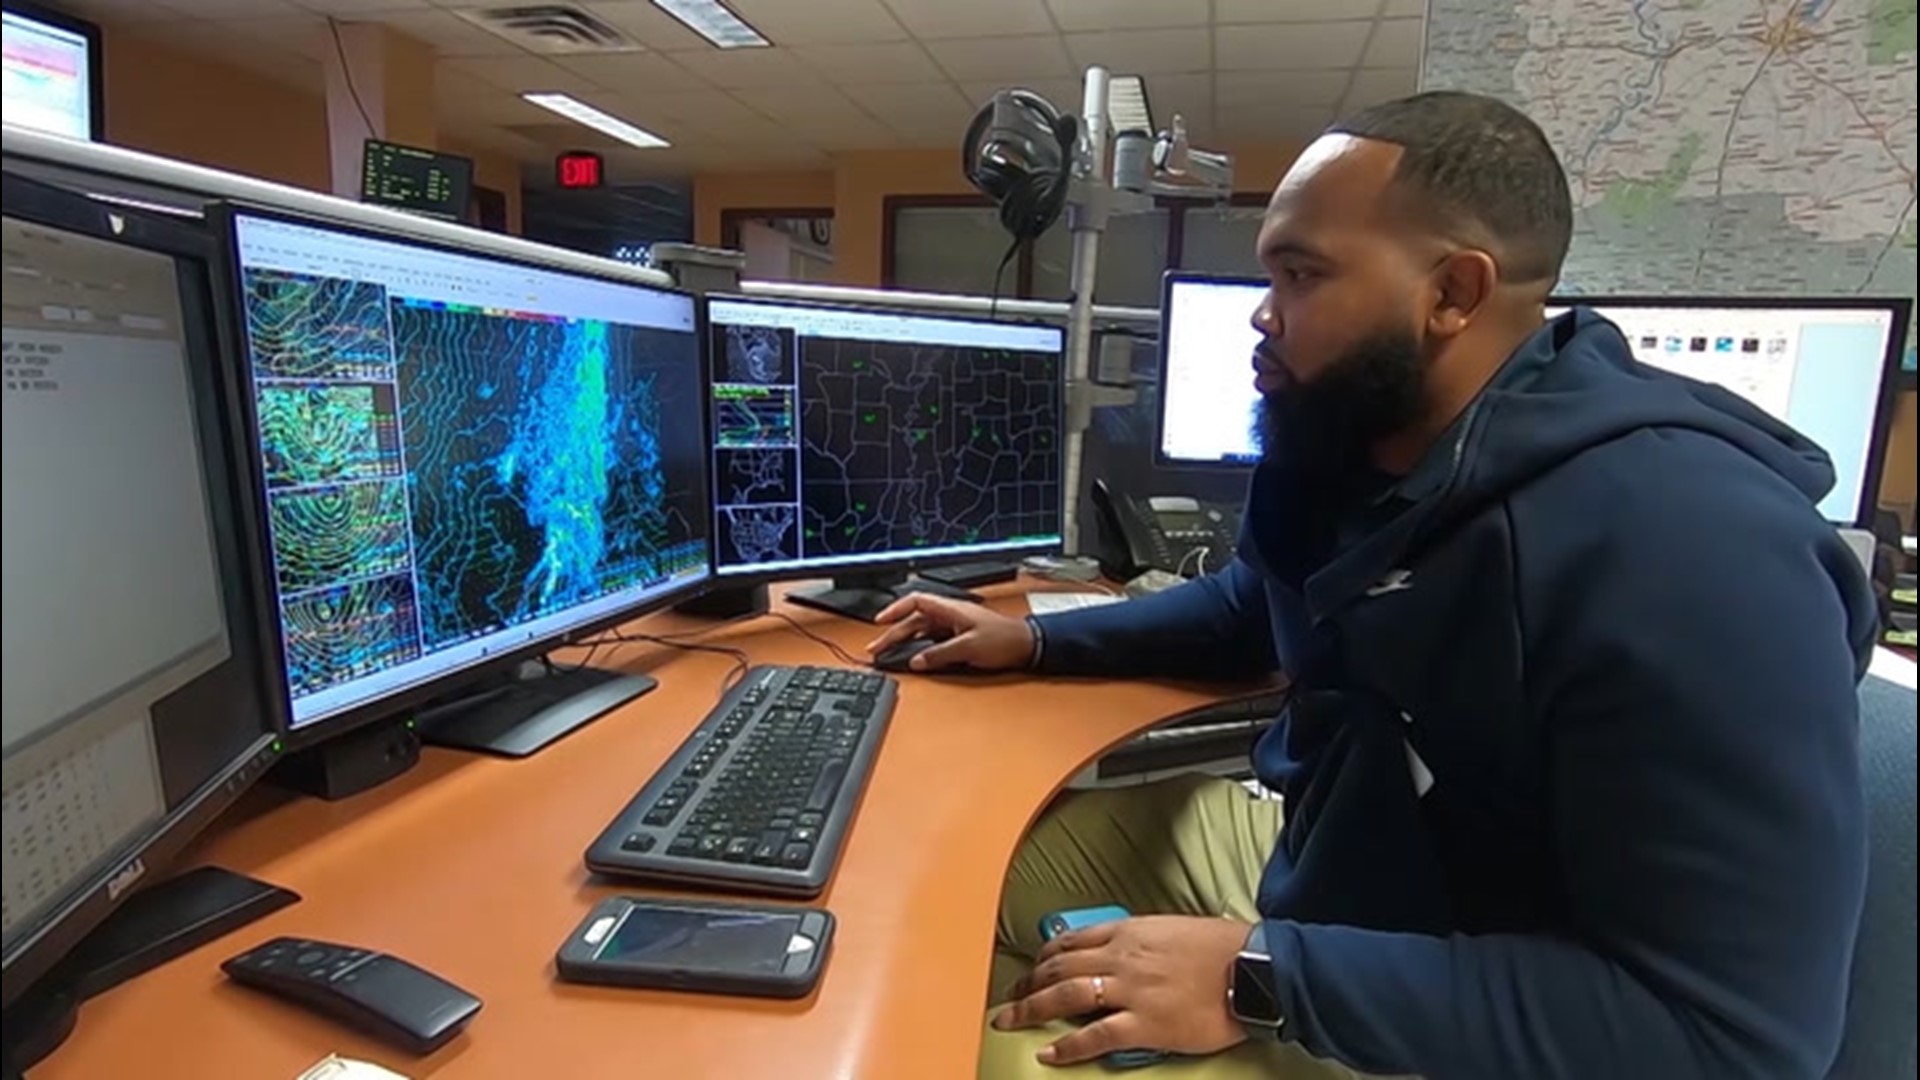 AccuWeather's Dexter Henry takes a look at the field of meteorology and whether opportunities for black meteorologists are growing.